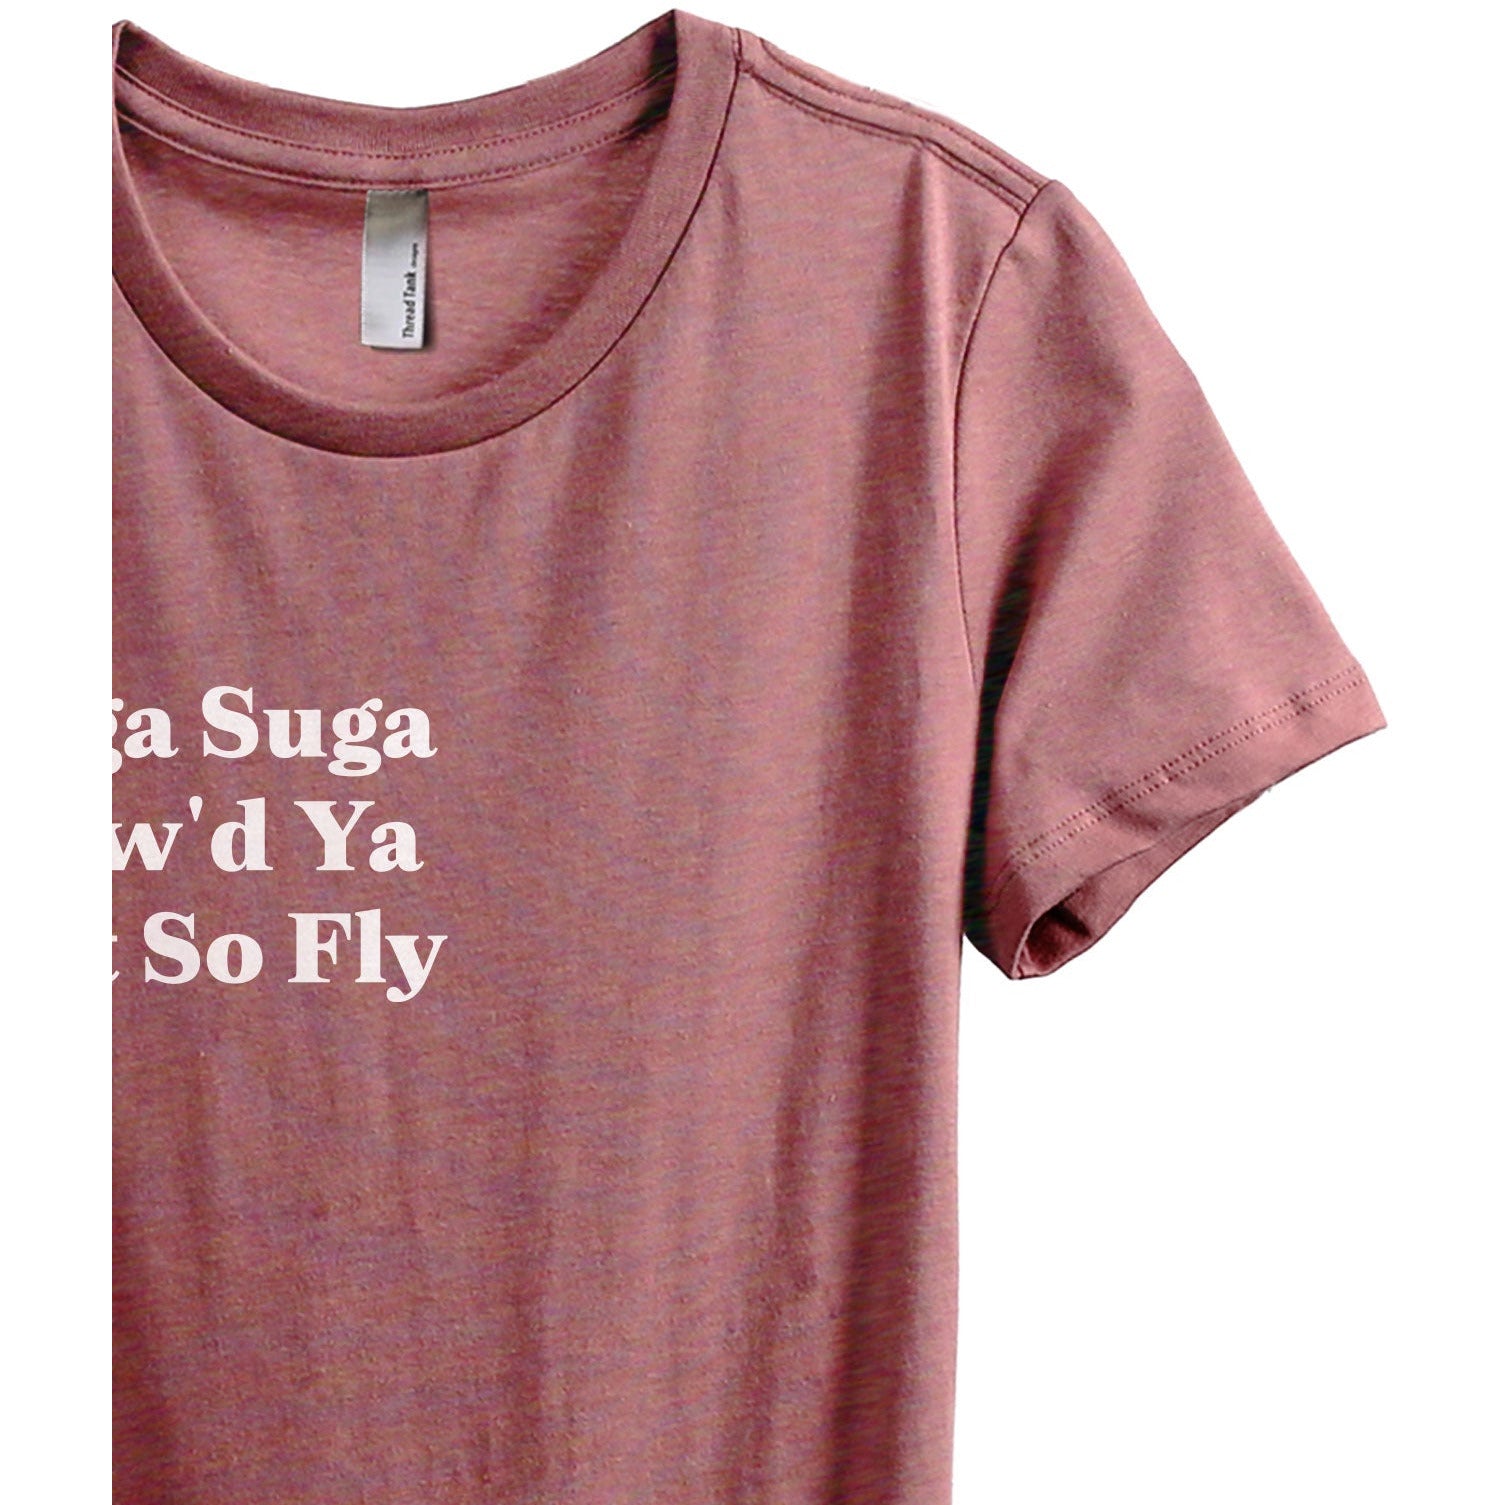 Suga Suga How'd Ya Get So Fly - Stories You Can Wear